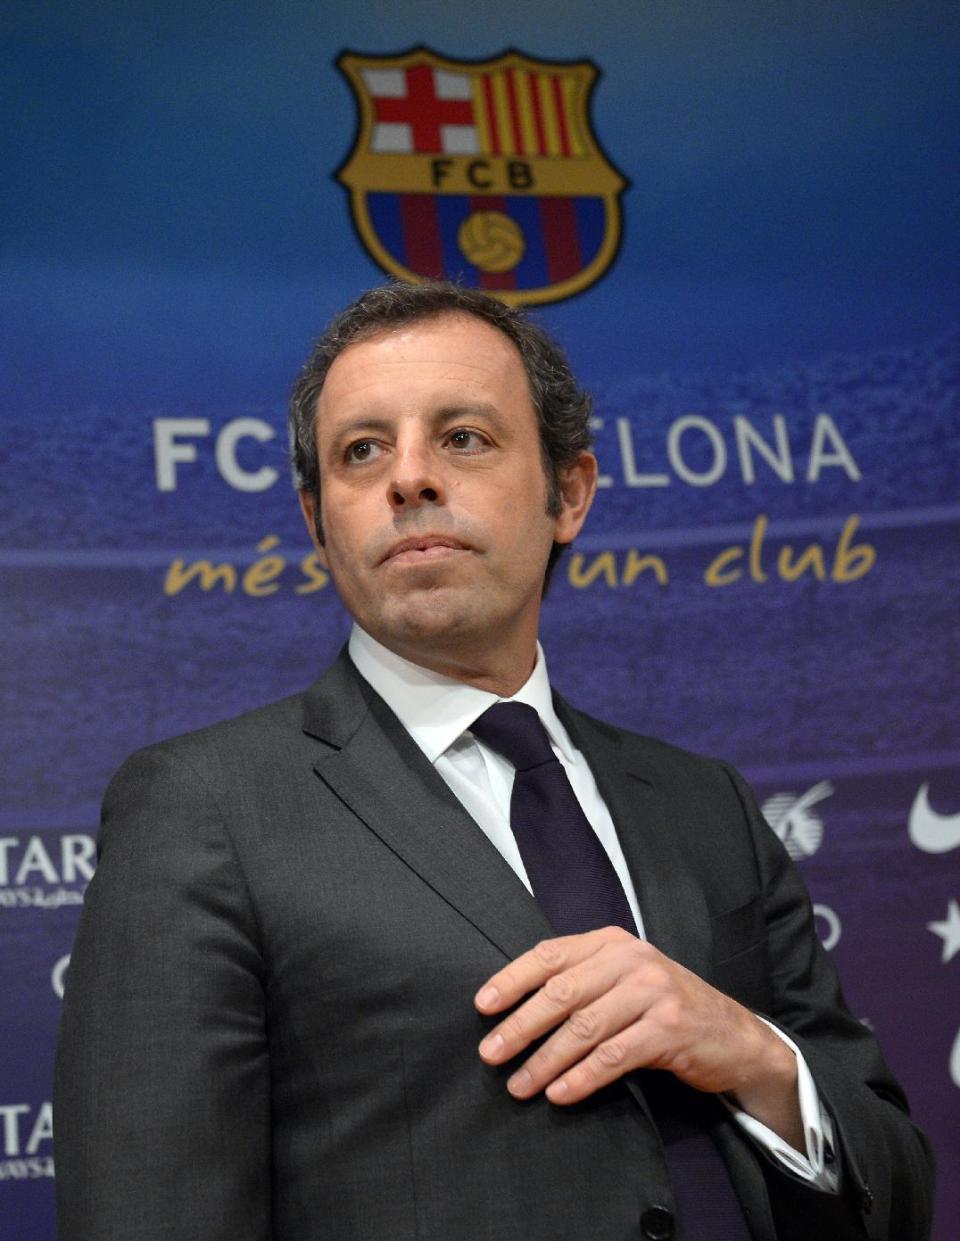 FC Barcelona's president Sandro Rosell, arrives for a press conference at the Camp Nou stadium in Barcelona, Spain, Thursday, Jan 23, 2014. Sandro Rosell is stepping down as president of Barcelona a day after a judge agreed to hear a lawsuit accusing him of allegedly hiding the cost of the transfer of Brazil striker Neymar.Rosell says he is resigning after an emergency meeting with Barcelona's board of directors on Thursday. Rosell says vice president Josep Bartomeu will take his place as president and finish the term that expires in 2016. Elected in 2010 to replace outgoing president Joan Laporta, Rosell said last April he planned to run for re-election in 2016. (AP Photo/Manu Fernandez)